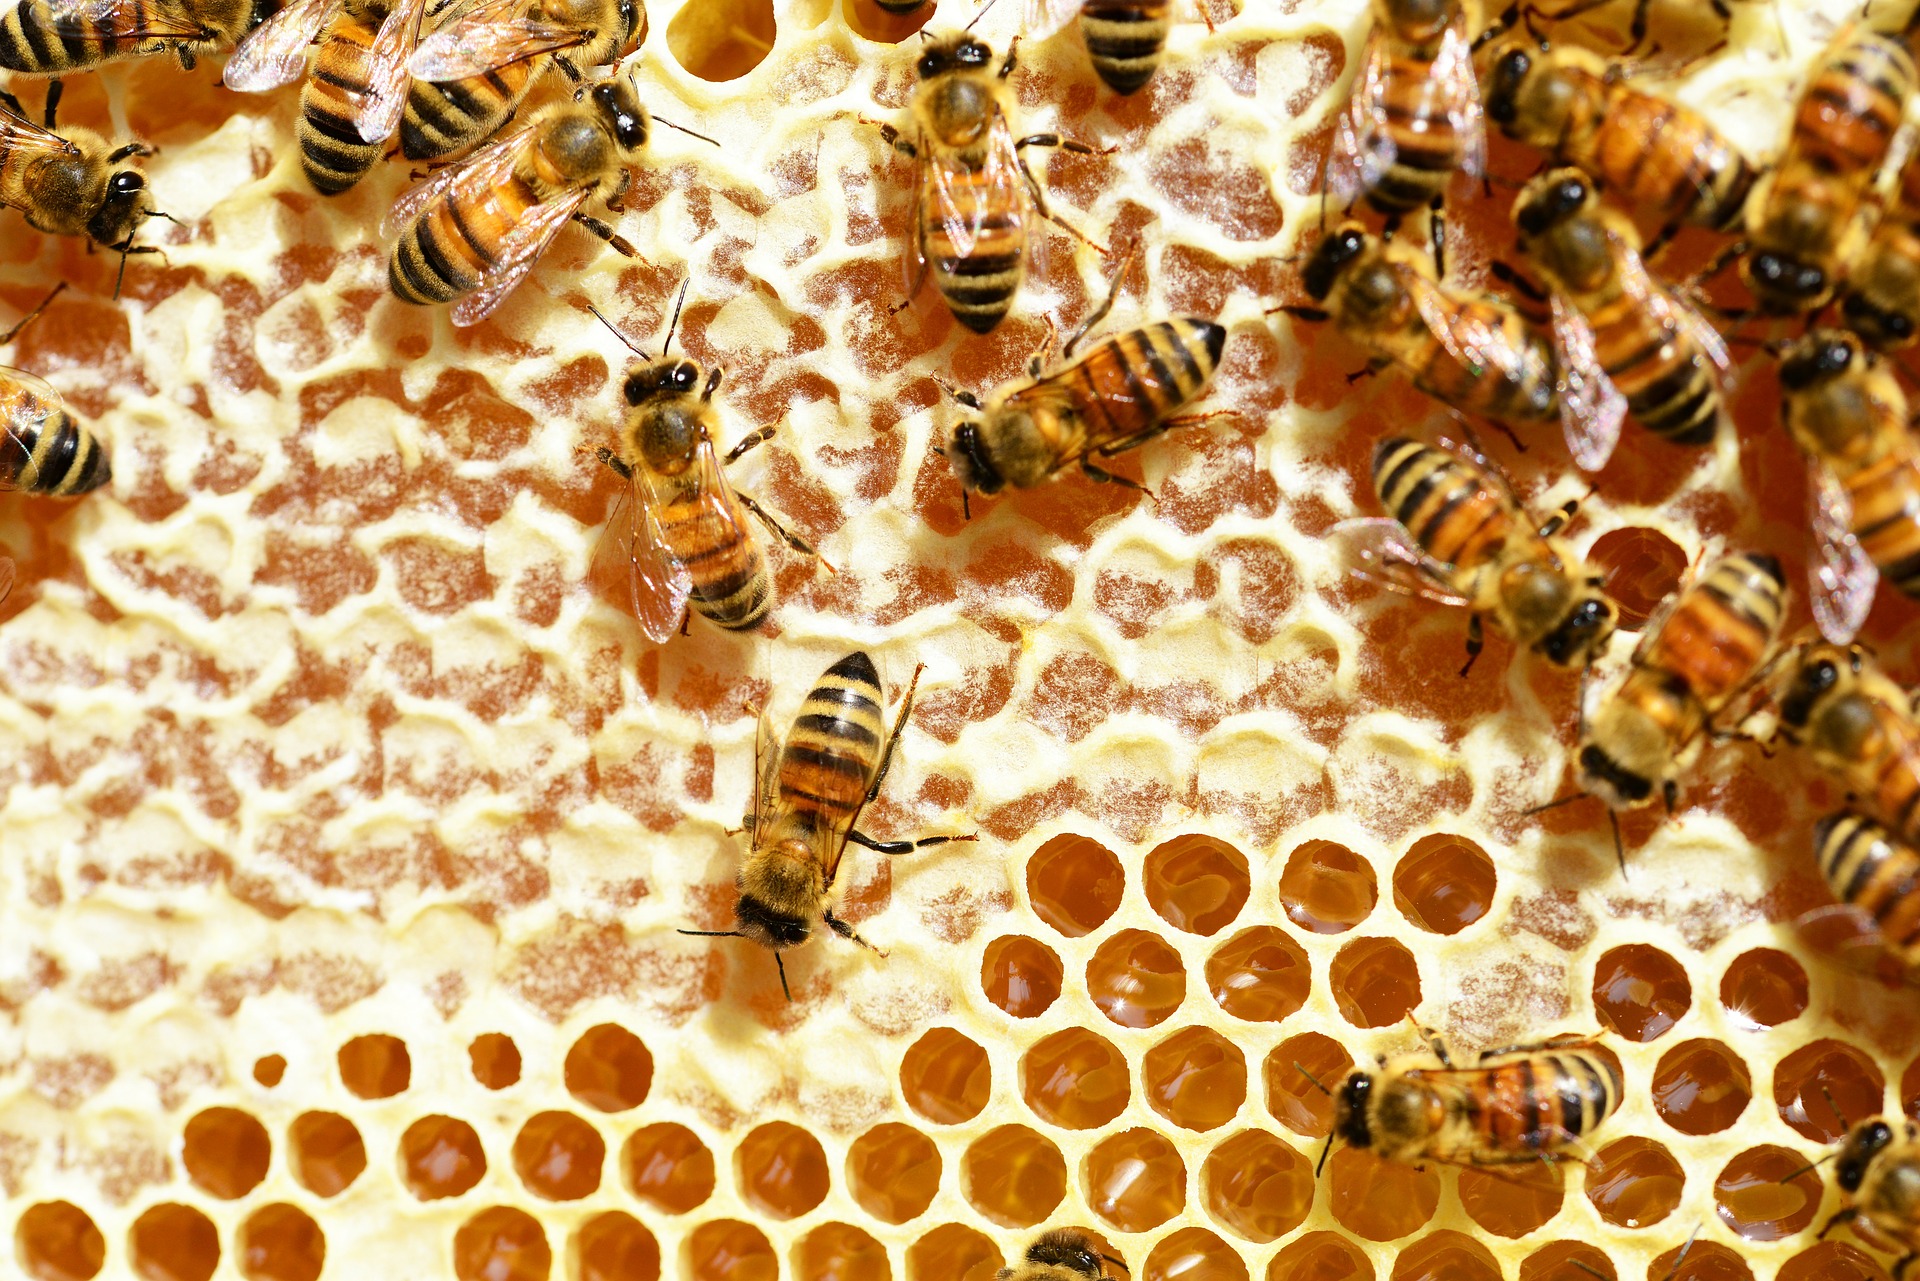 bees-345628_1920